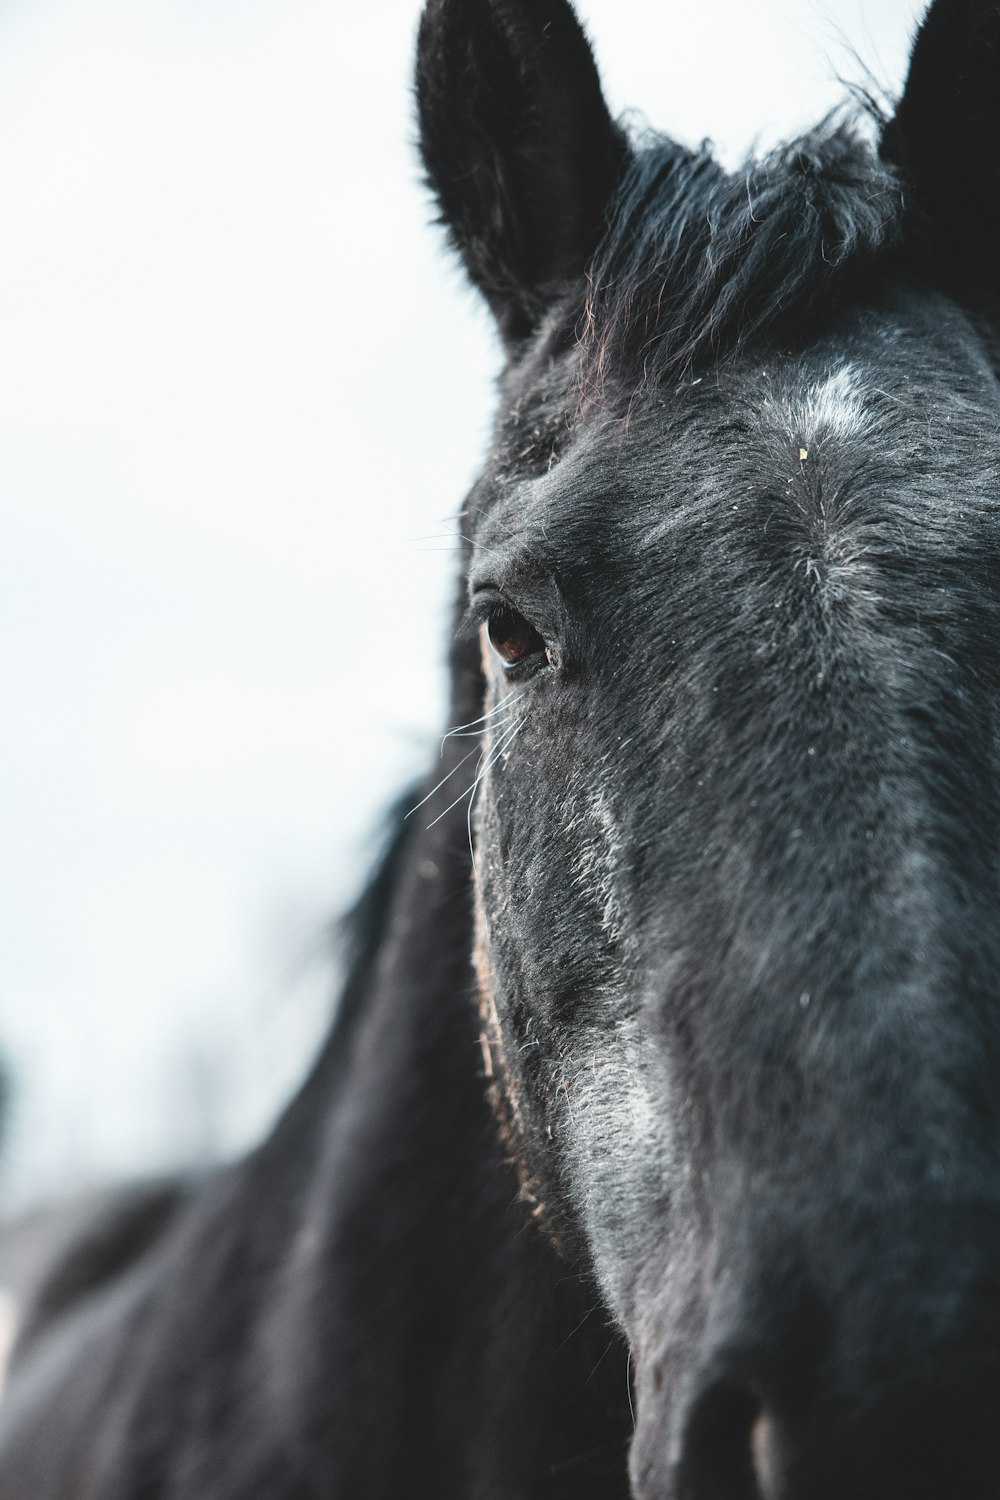 a close up of a black horse's face